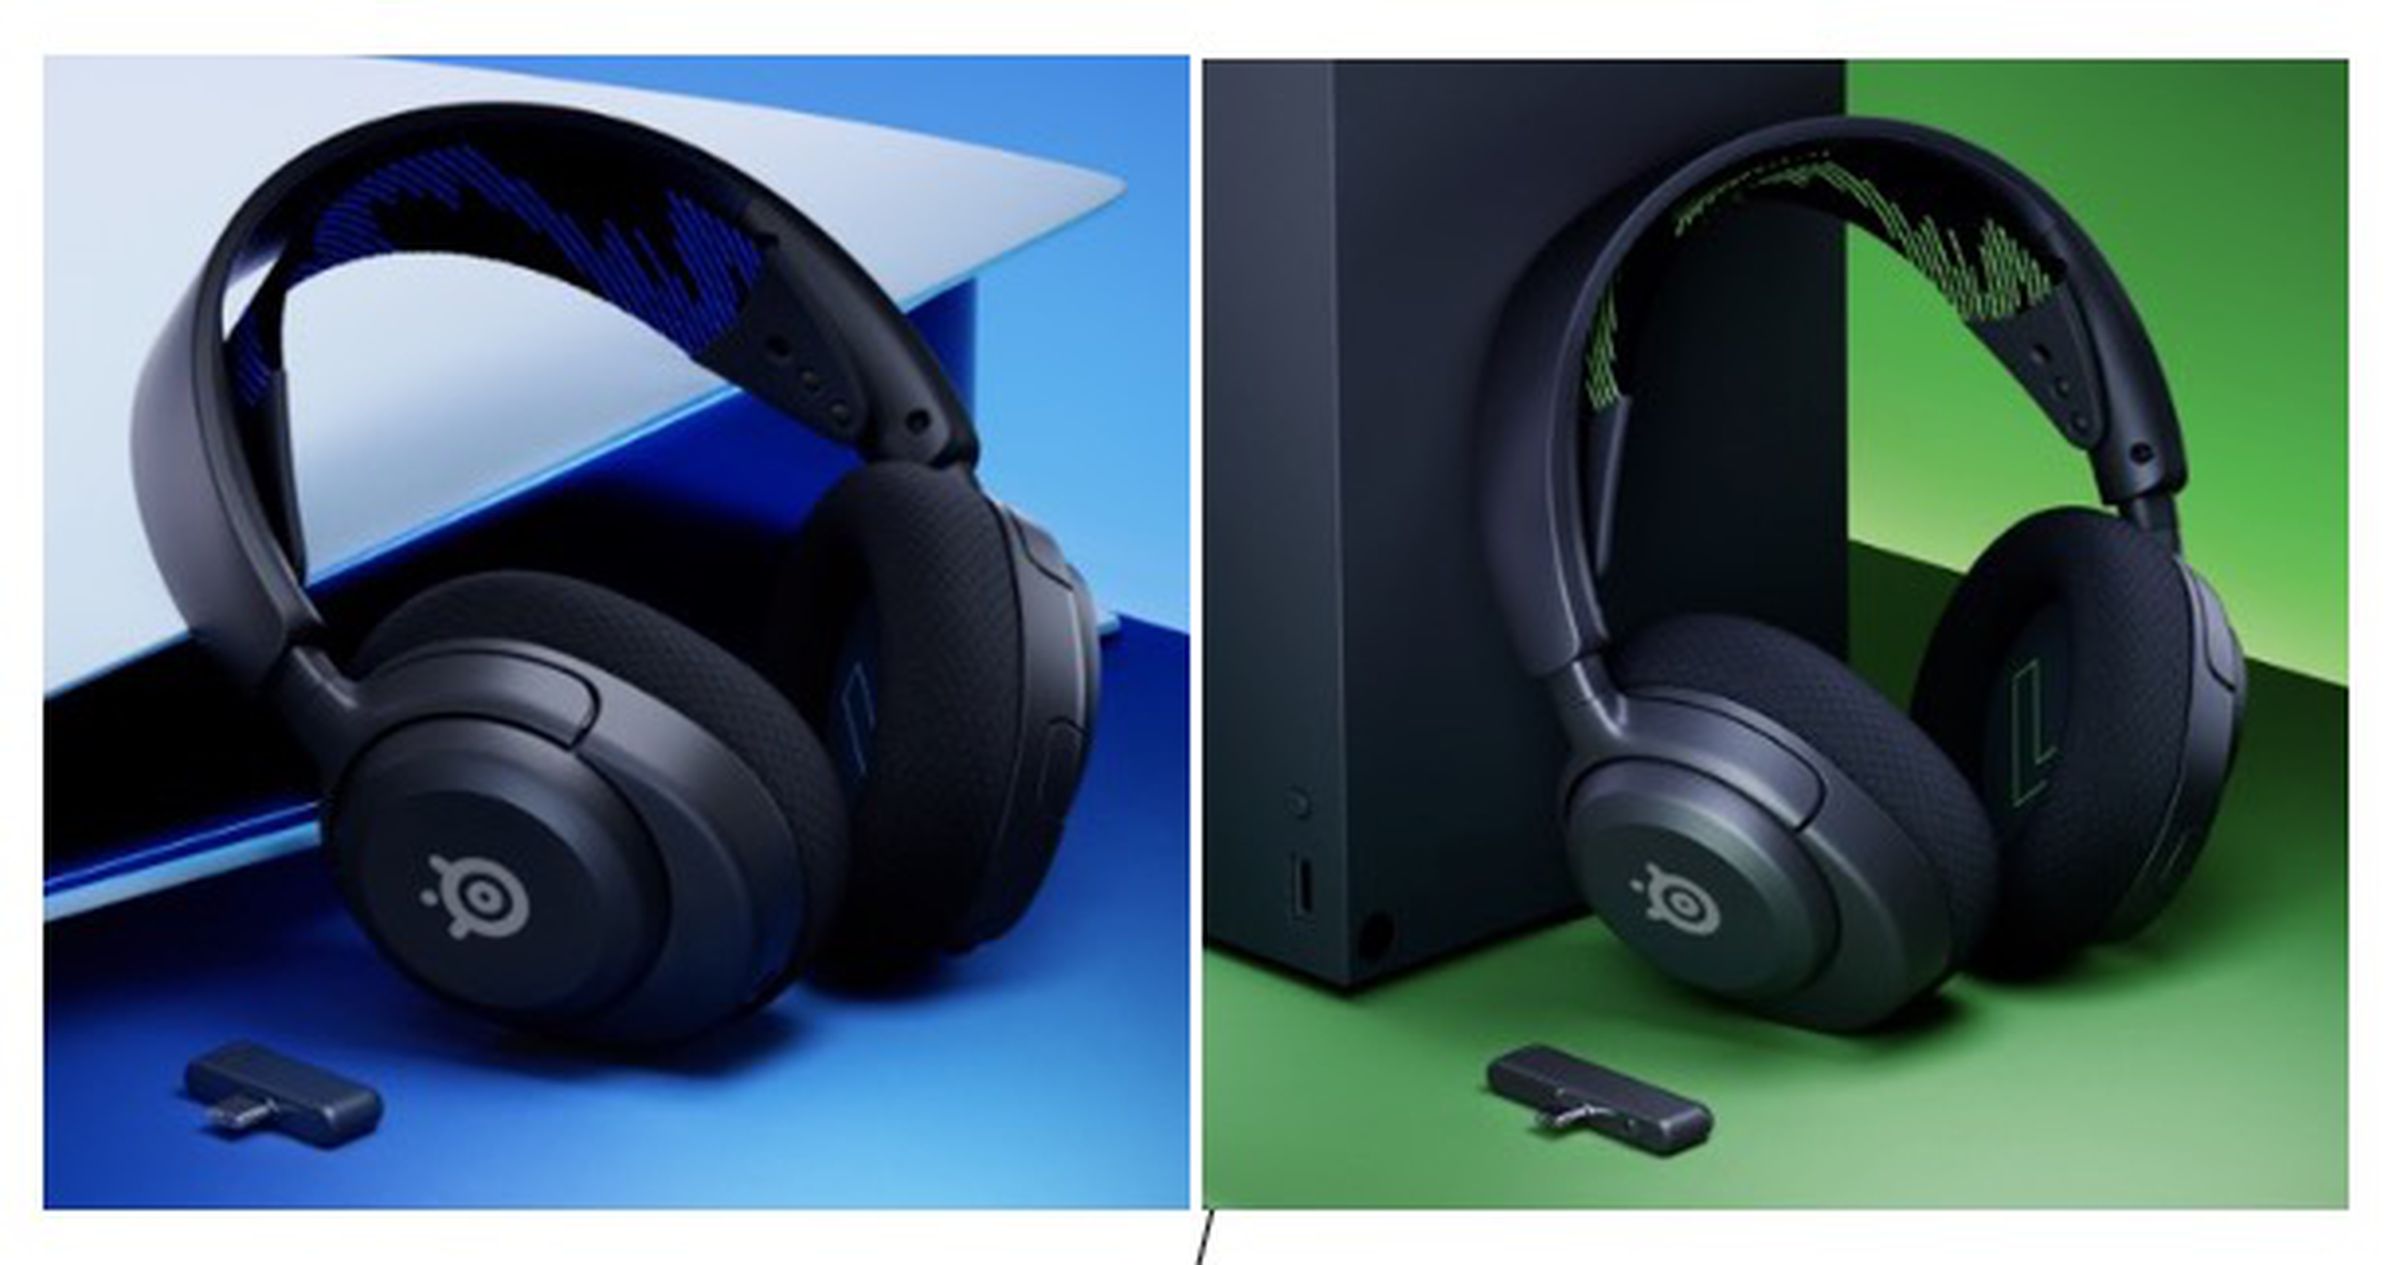 A picture of the PlayStation and Xbox-specific models of SteelSeries’ Arctis Nova 4 gaming headset leaning against their respective consoles.